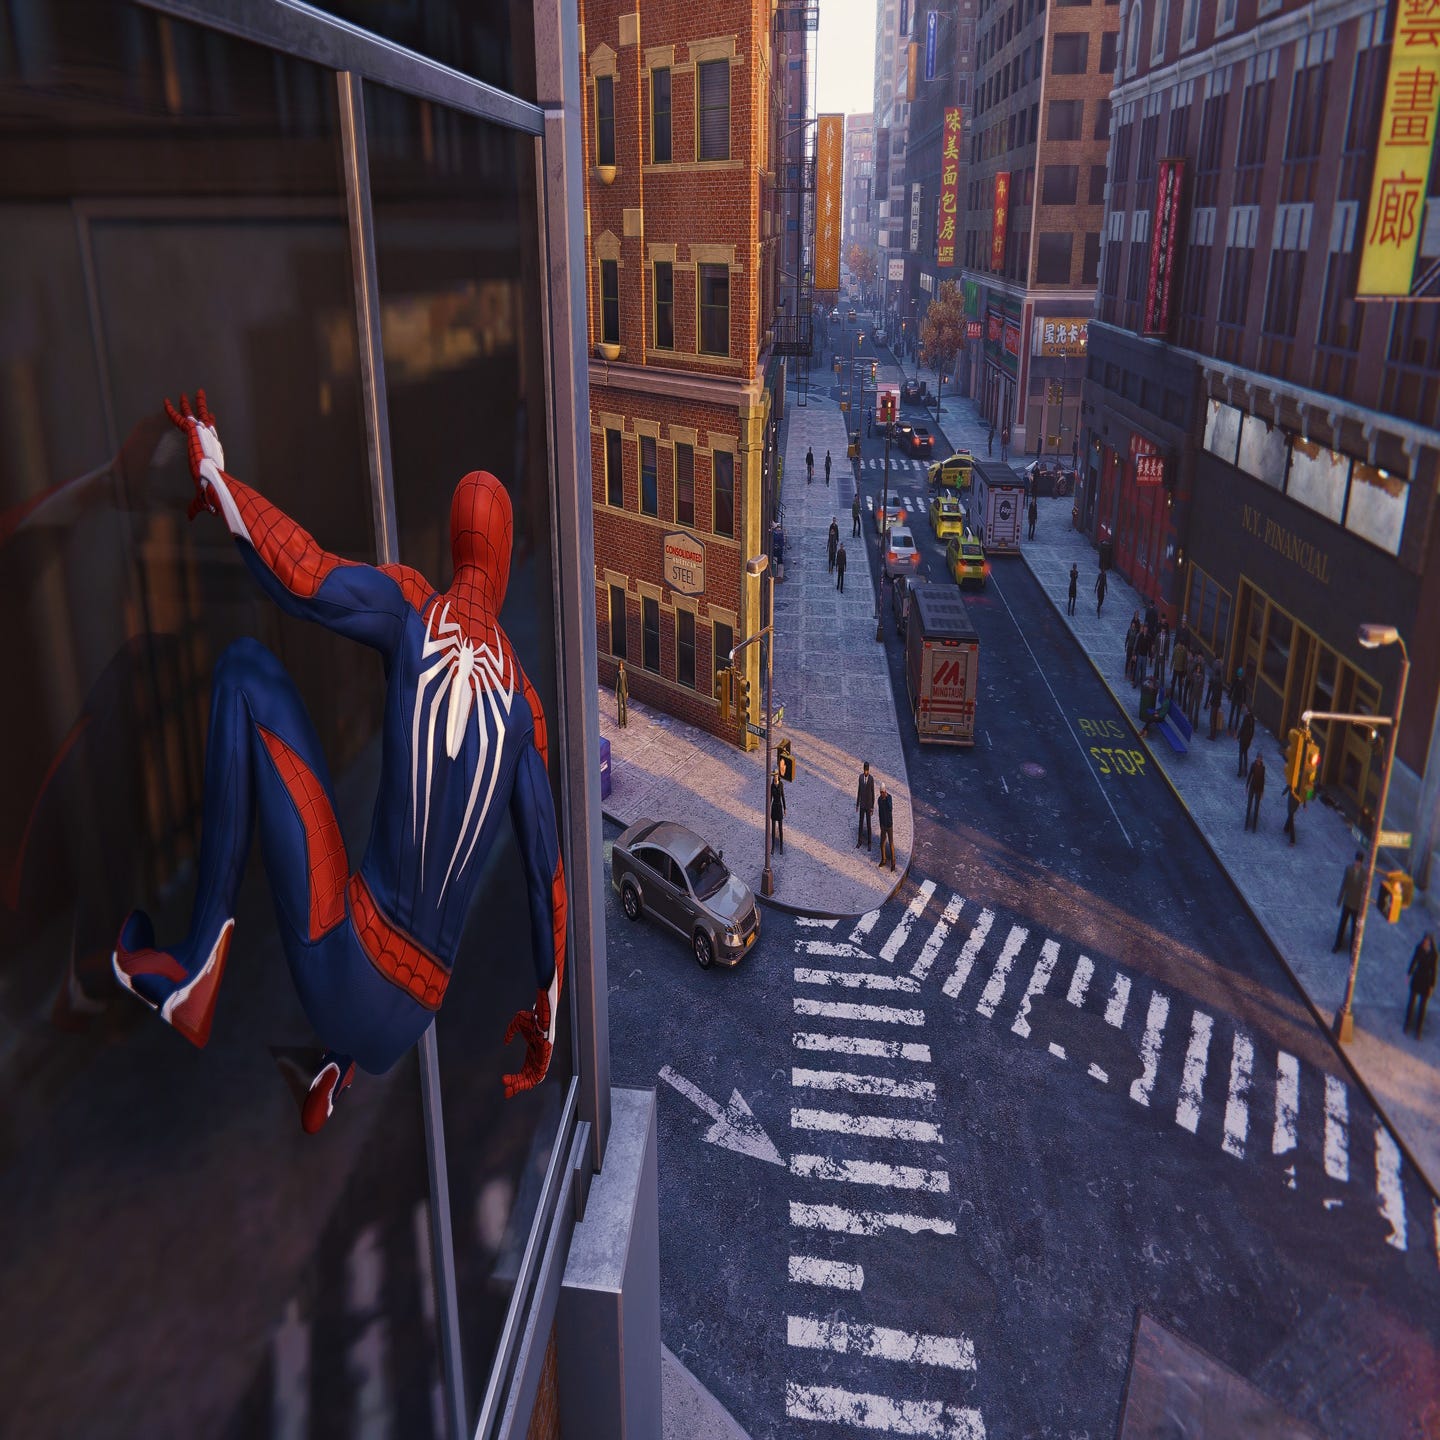 Spider-Man Remastered PC System Requirements and Features